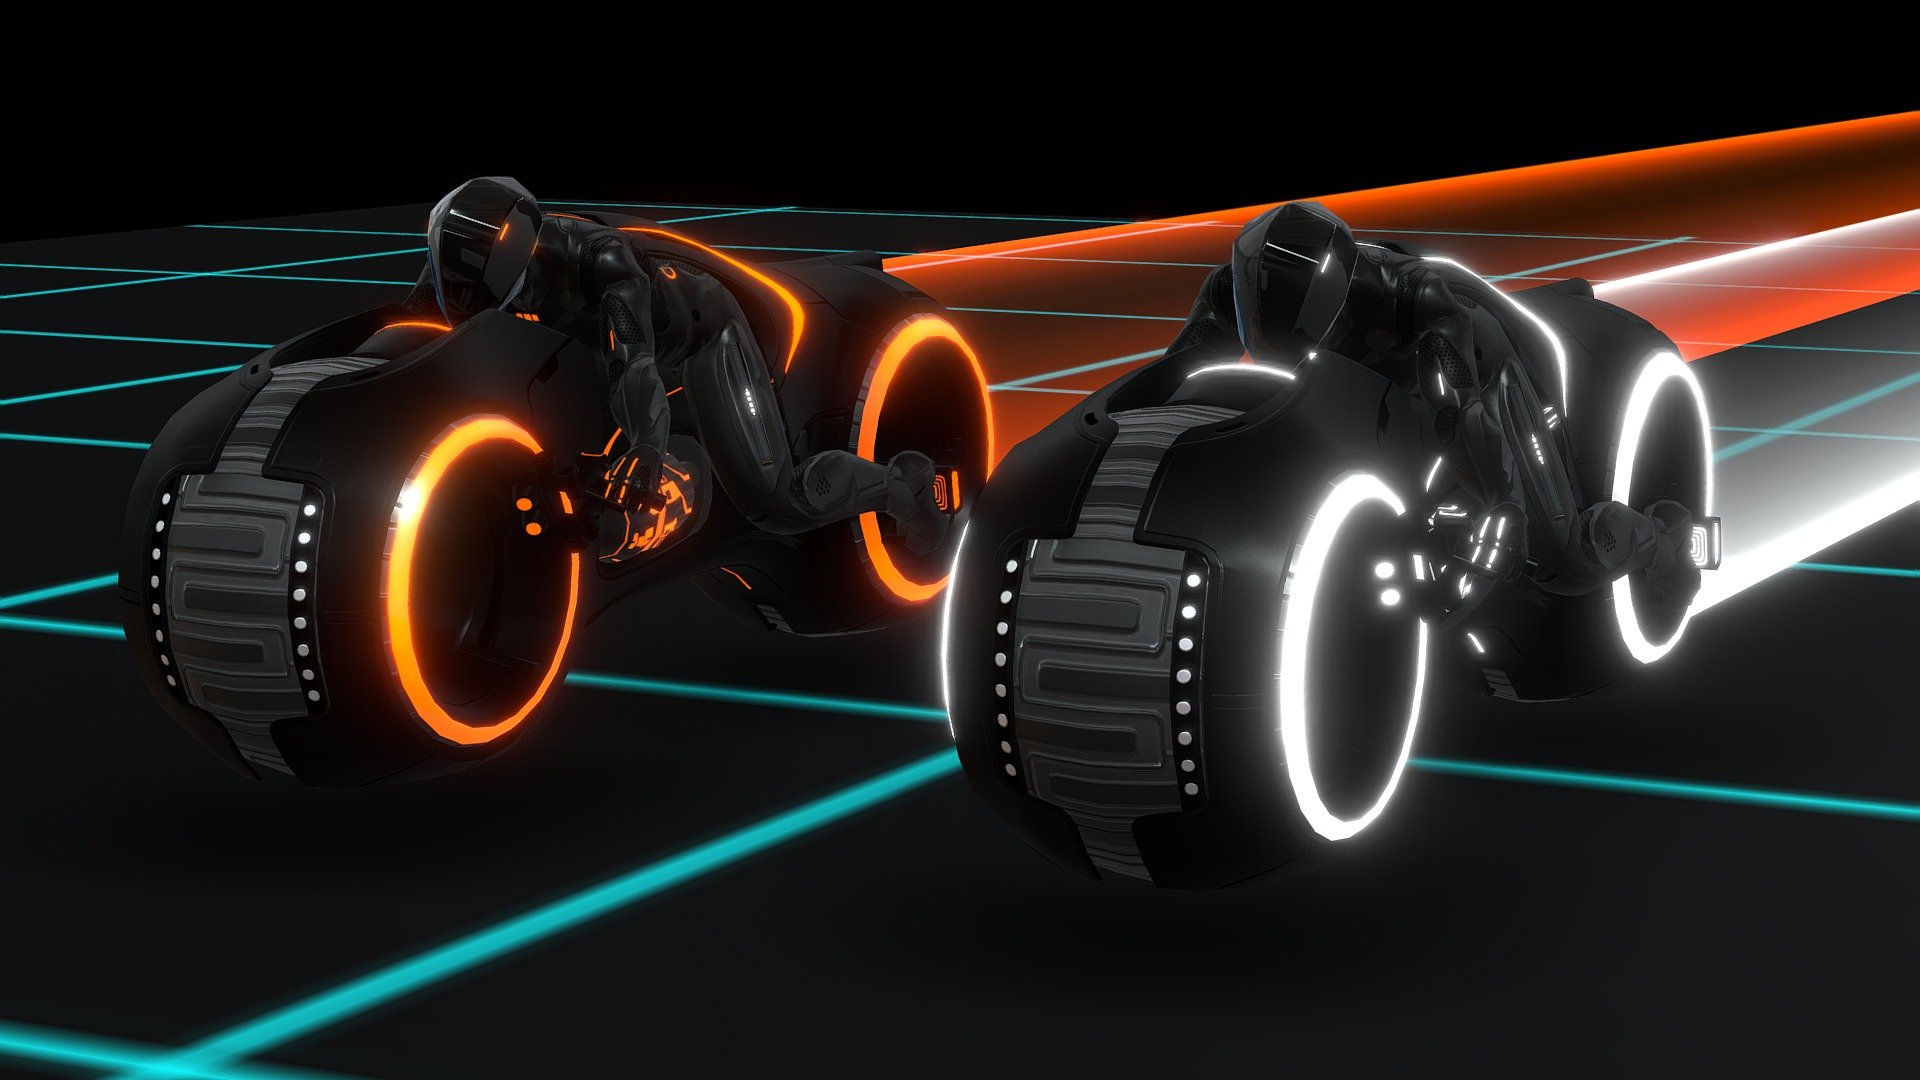 Tron and Rinzler racing on the Lightcycle Grid 

Modeled in Maya 2016 - Race on the Lightcycle Grid - 3D model by Wil (@fapaknight) 3d model